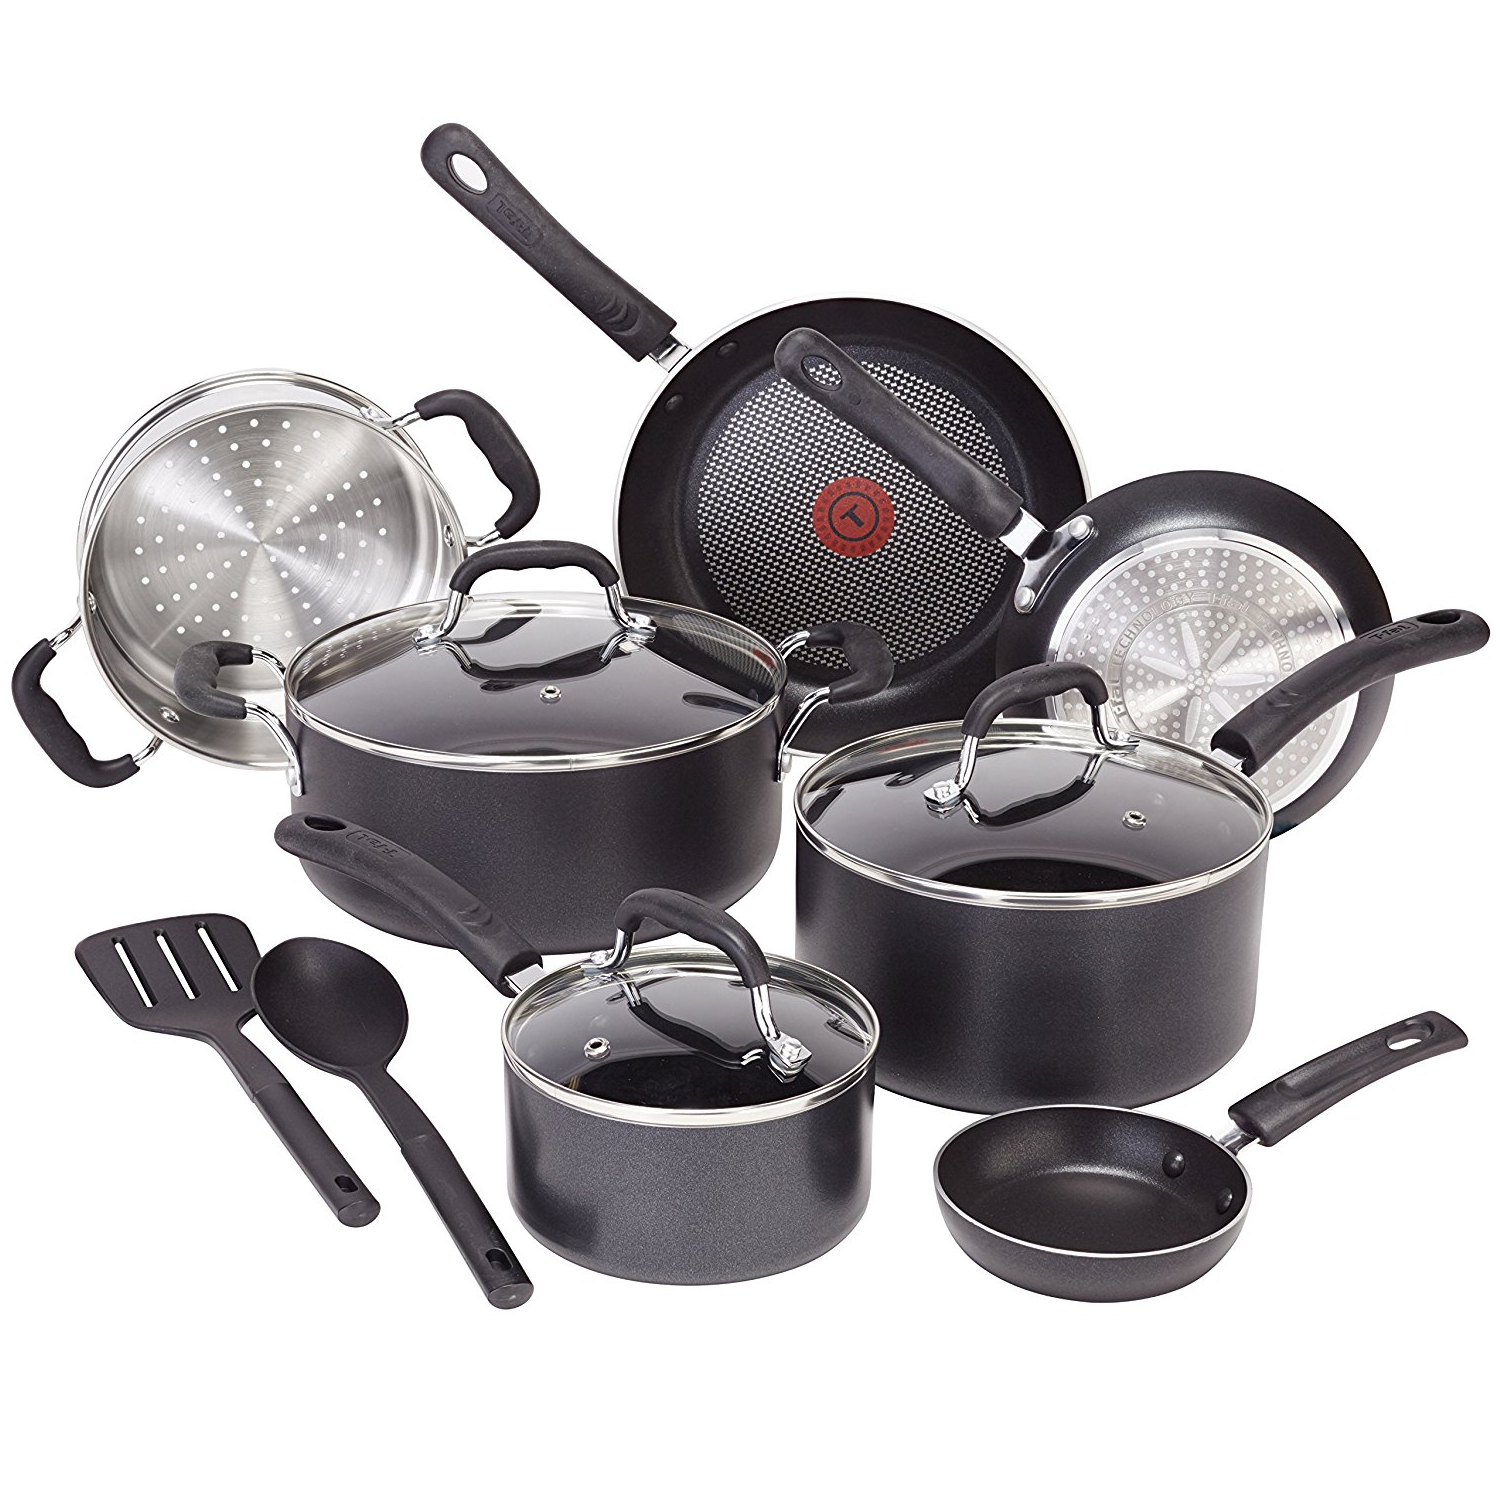 T-fal C515SC Professional Total Nonstick Cookware Set (12 Piece) Only $74.99 Shipped!